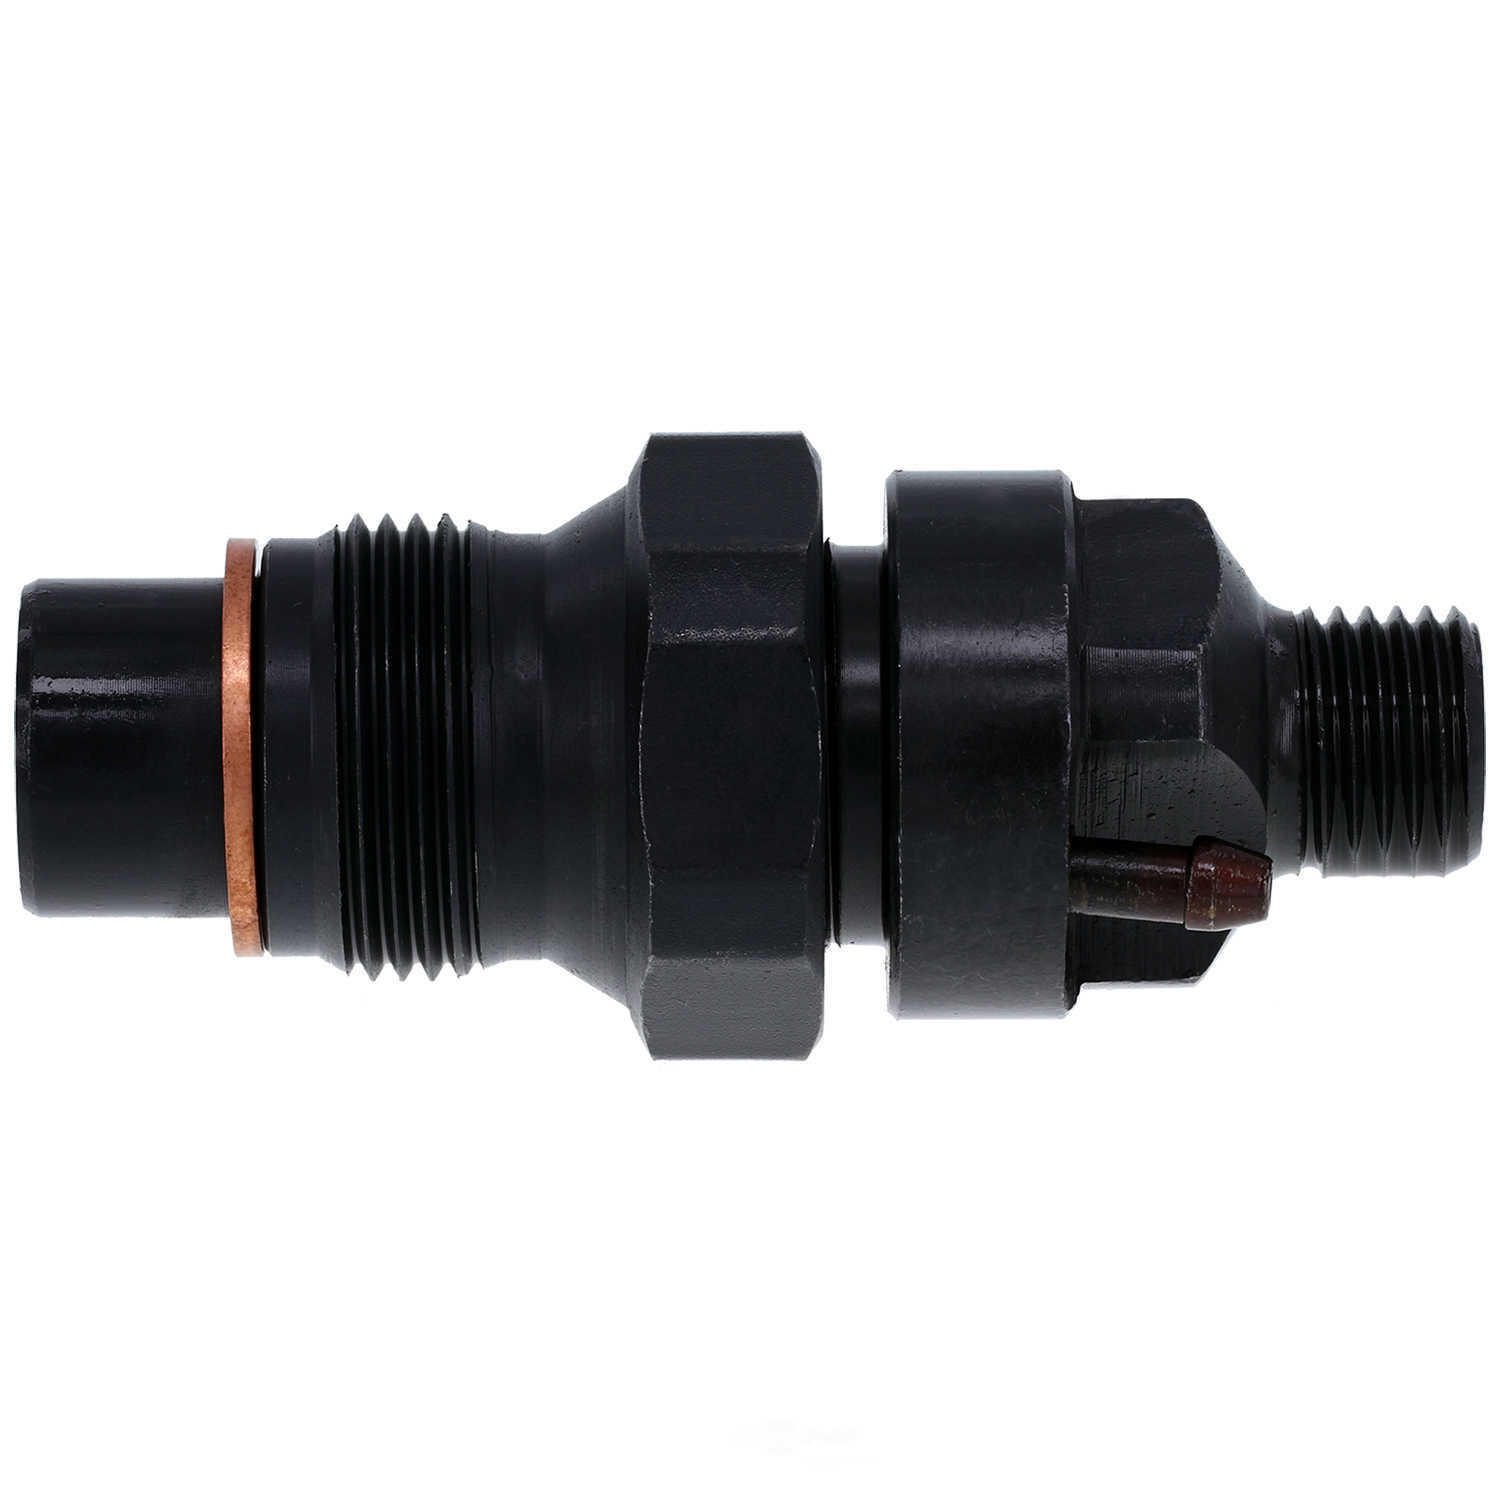 GB REMANUFACTURING INC. - New Diesel Fuel Injector - GBR 631-104